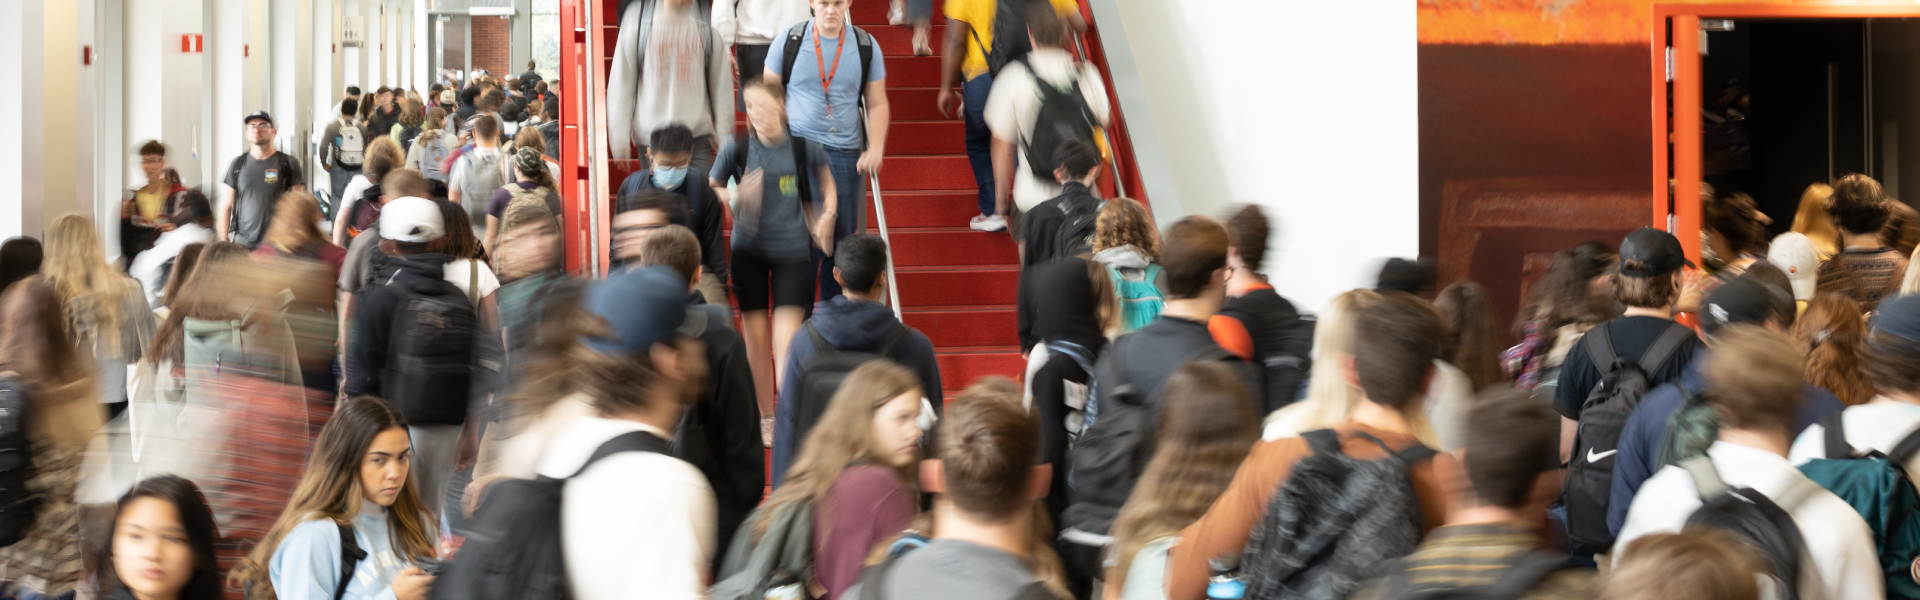 A crowded hall and stairway filled with students wearing backpacks.